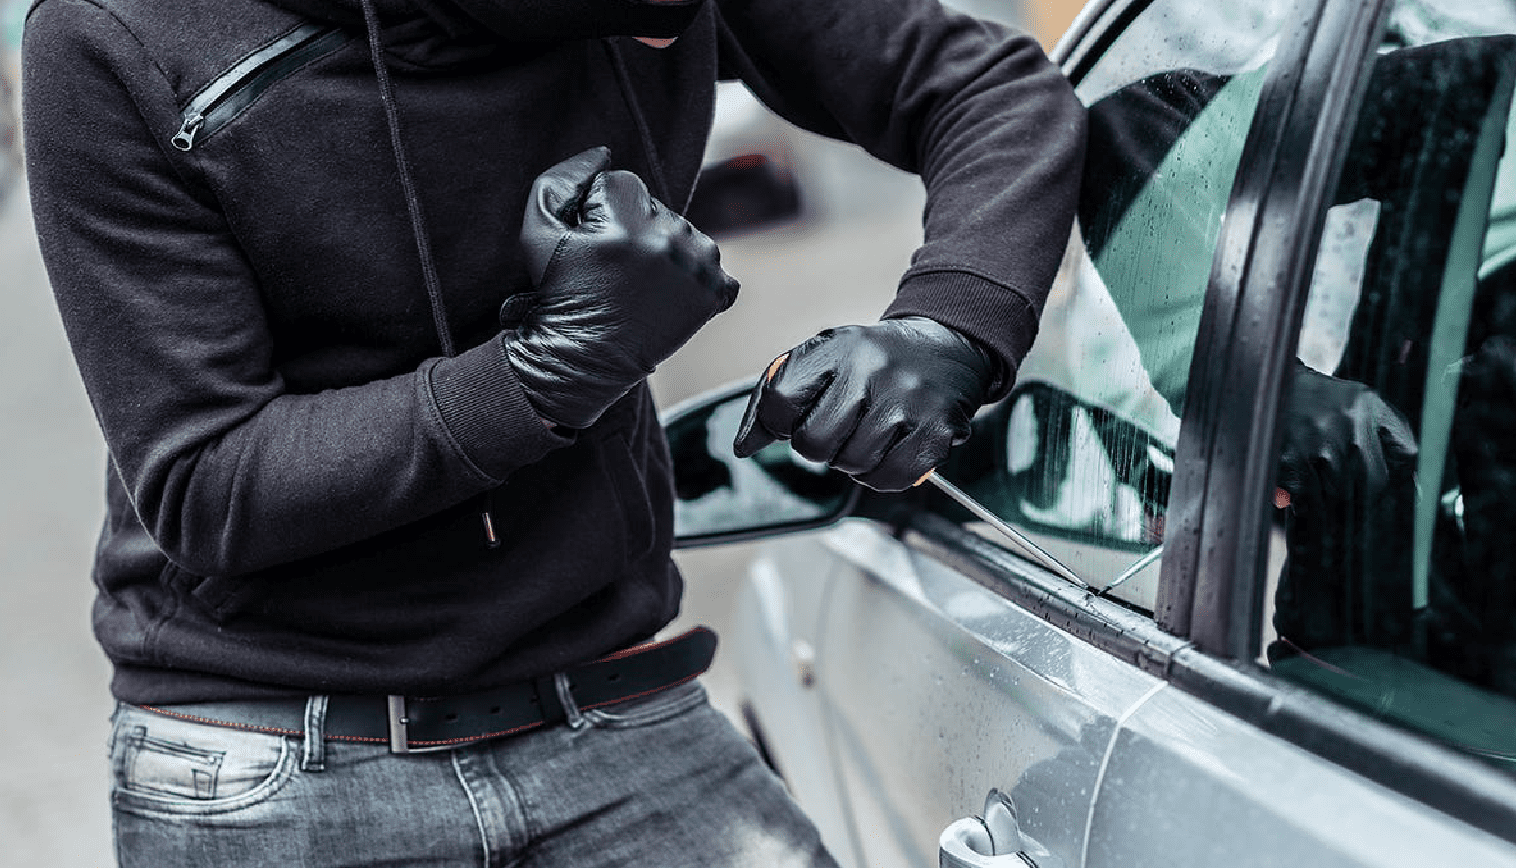 How to Prevent Car Theft With These Simple Tricks and Devices